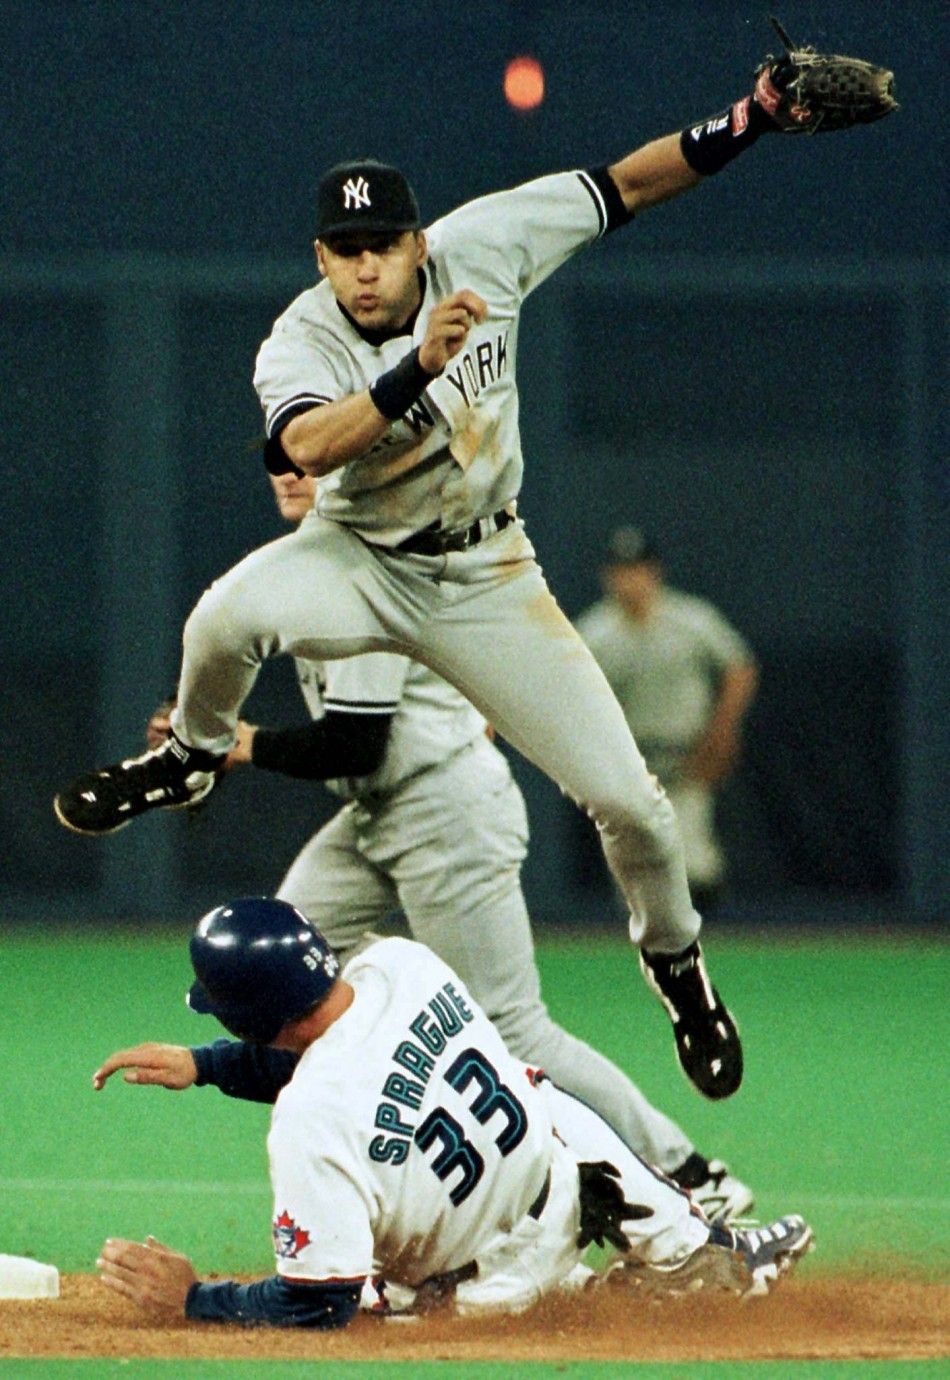 New York Yankees shortstop Derek Jeter jumps out of the way